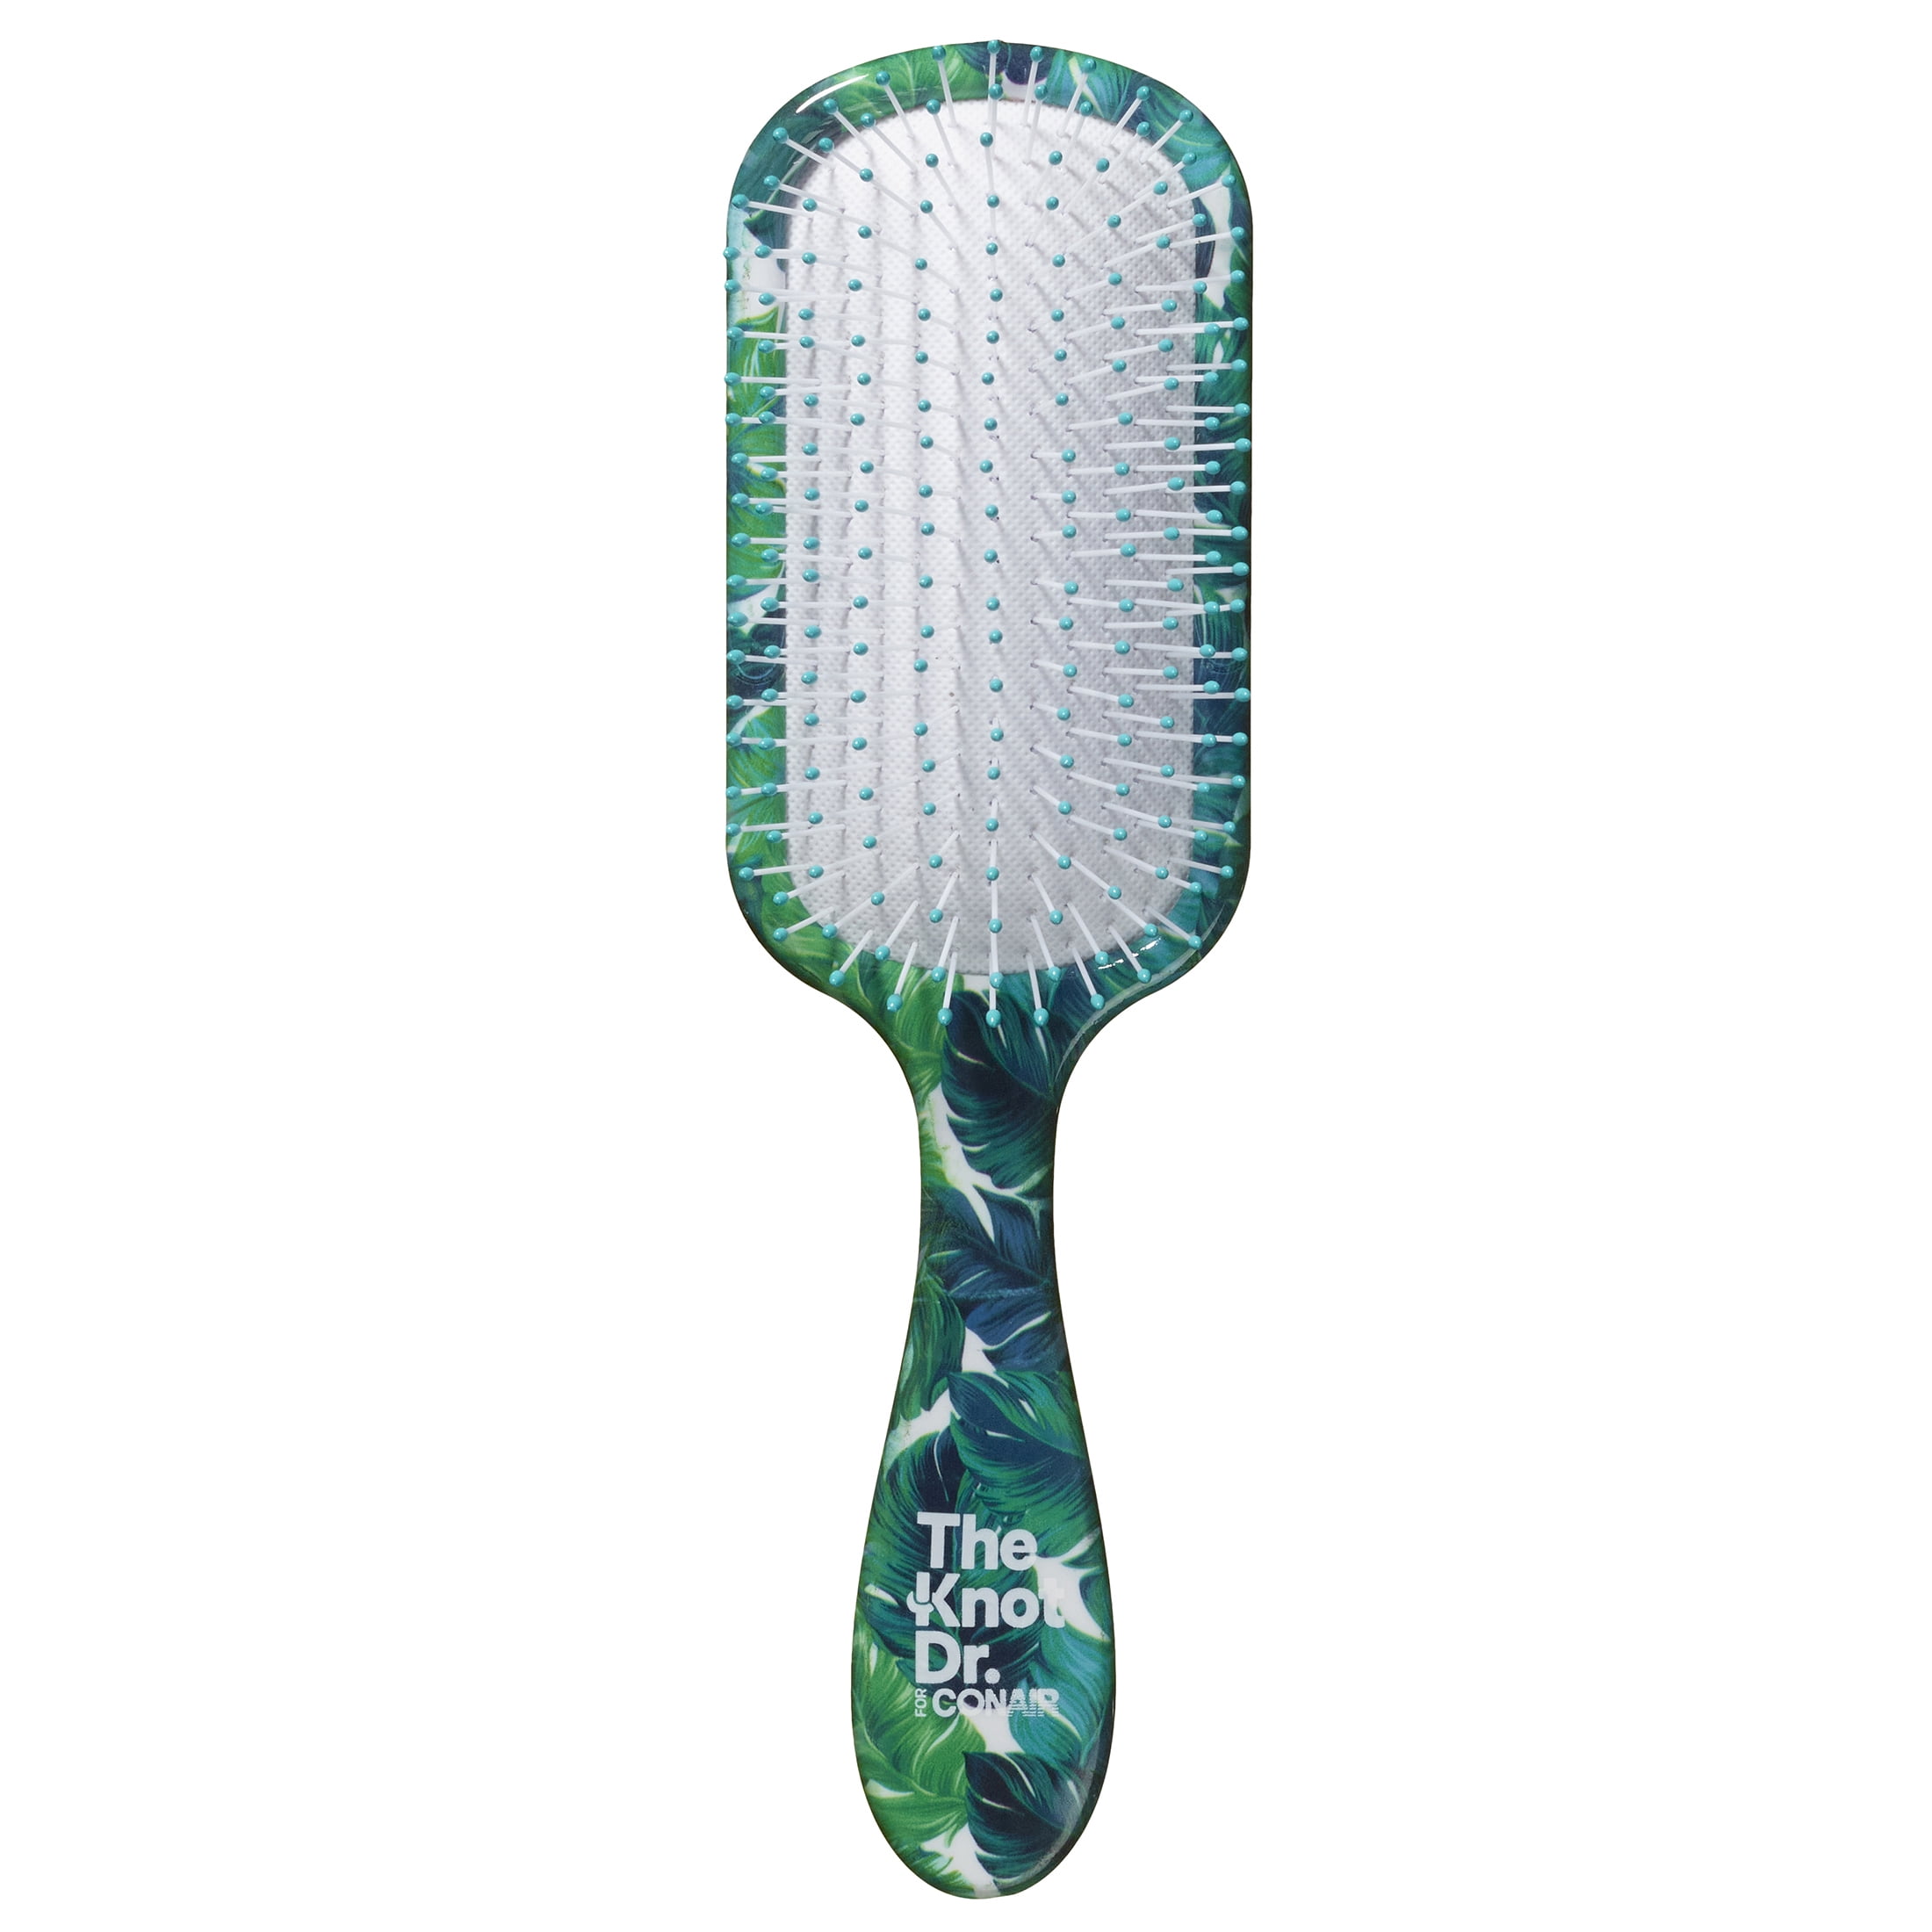 The Knot Dr. for Conair Pro Brite Wet and Dry Detangling Hairbrush, Green Leaf Print